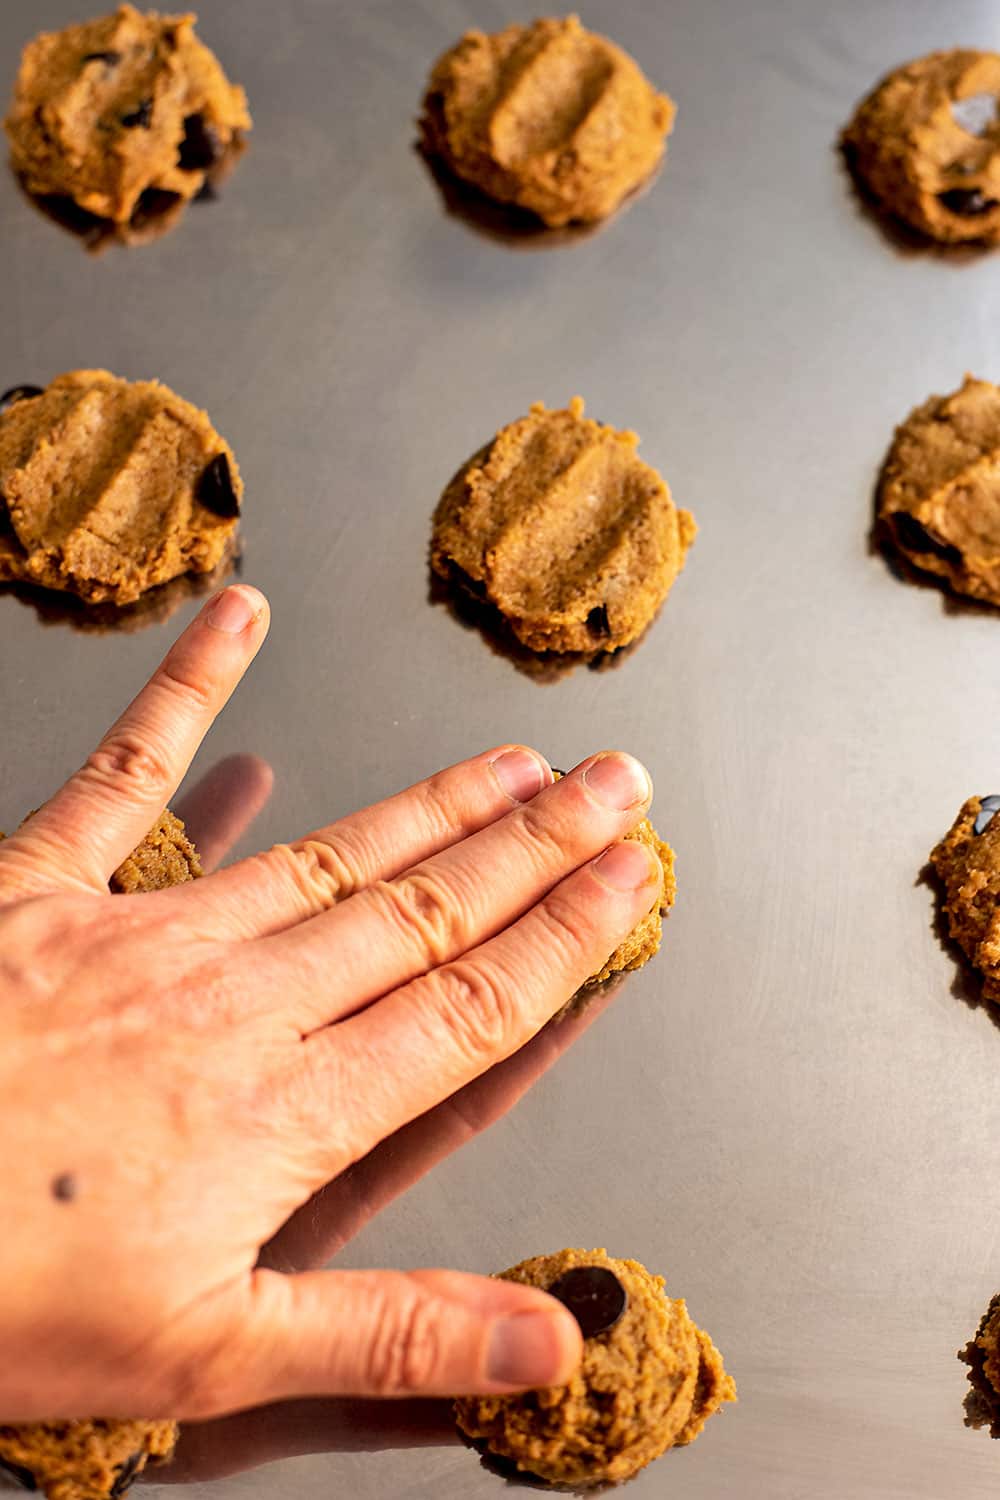 Hand pressing down cookie dough on baking sheet.